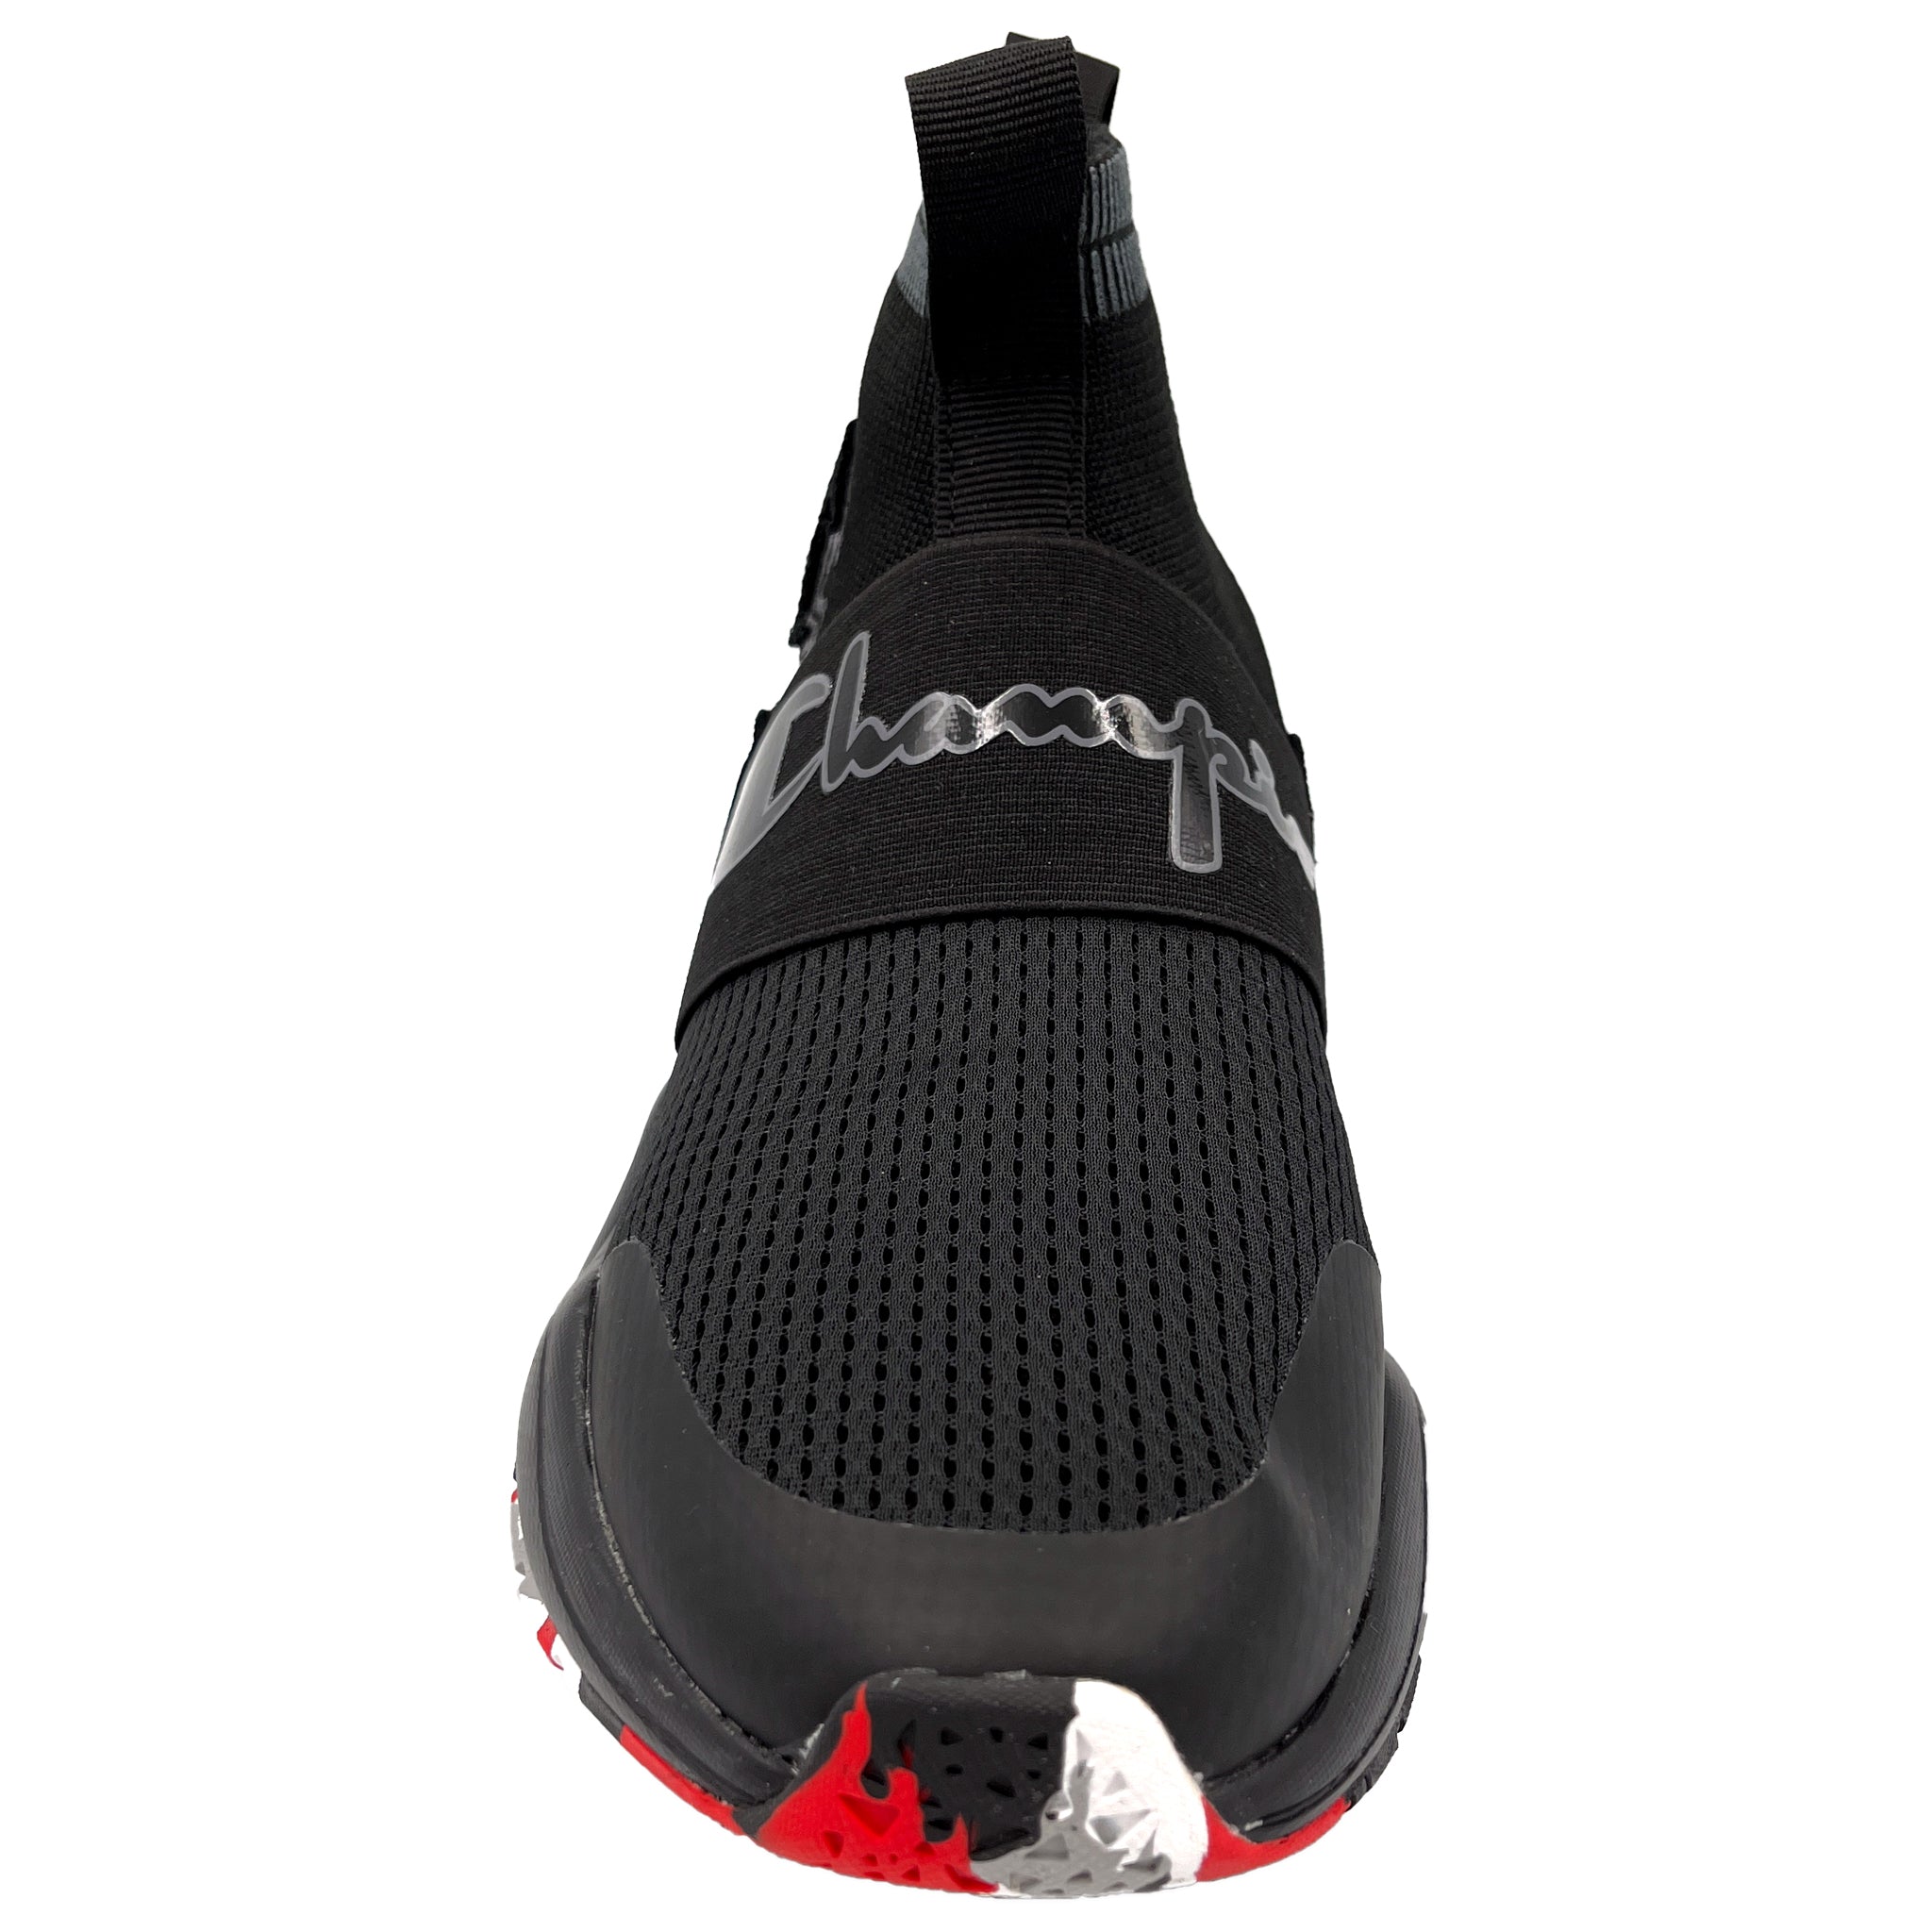 Men's Black/Scarlet Rally Pro – That Shoe and More